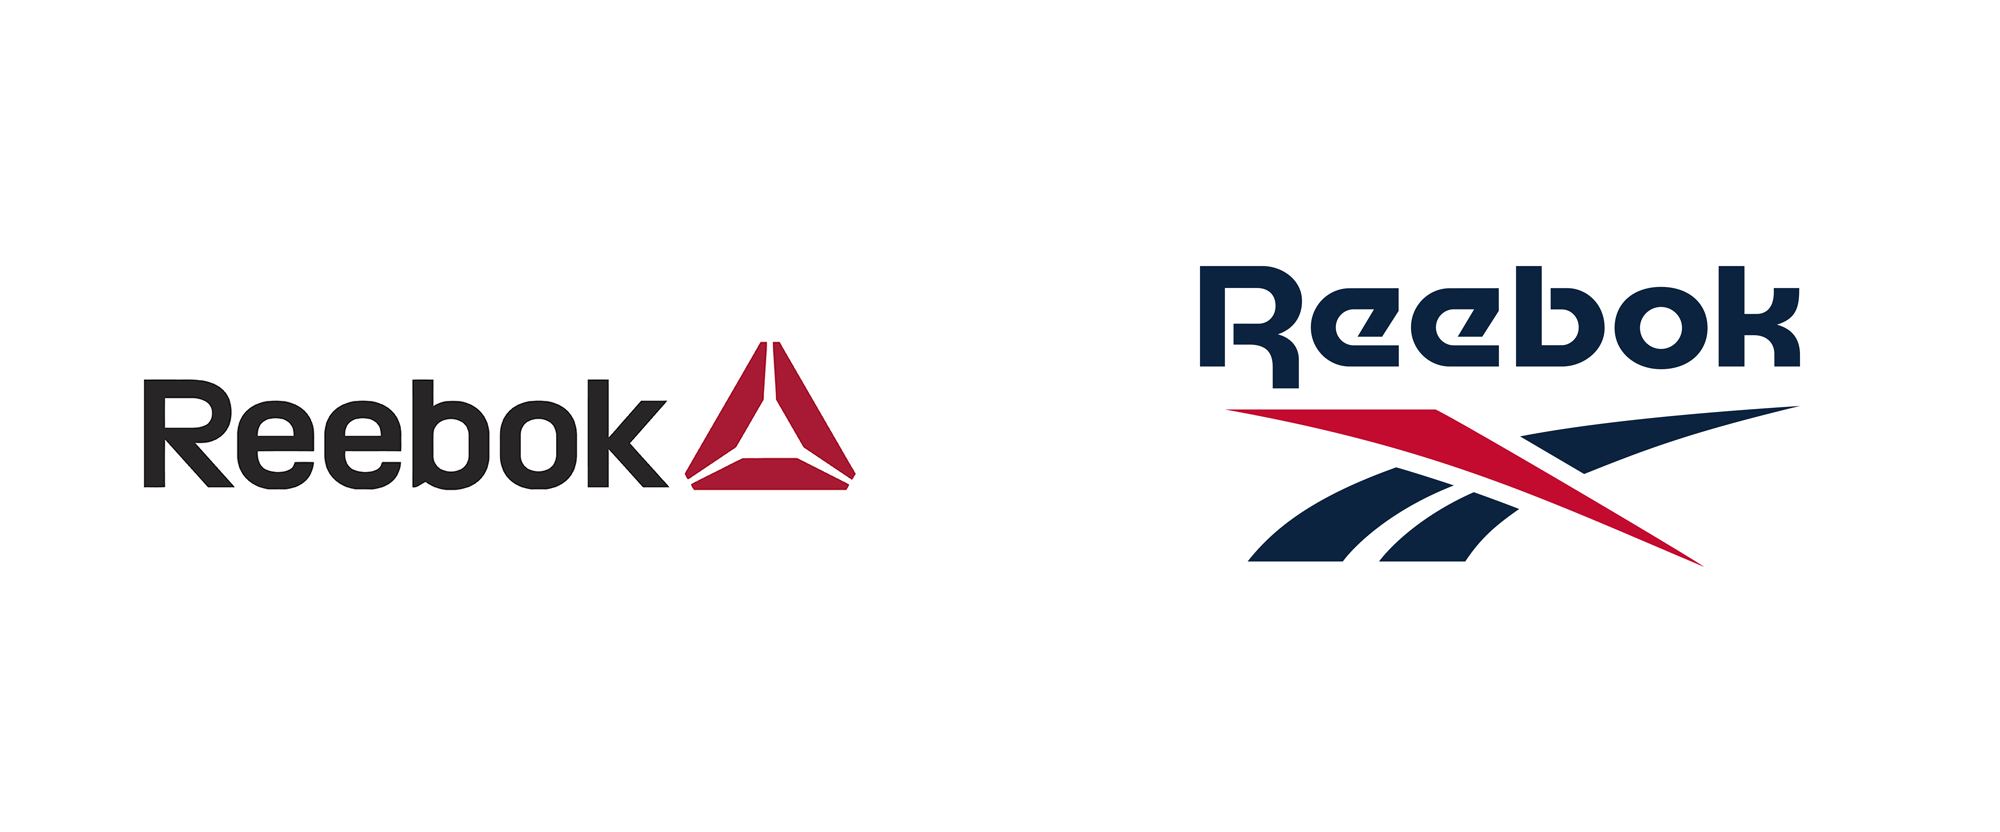 Brand New: New Logo and Identity for Reebok done In-house with Darrin  Crescenzi